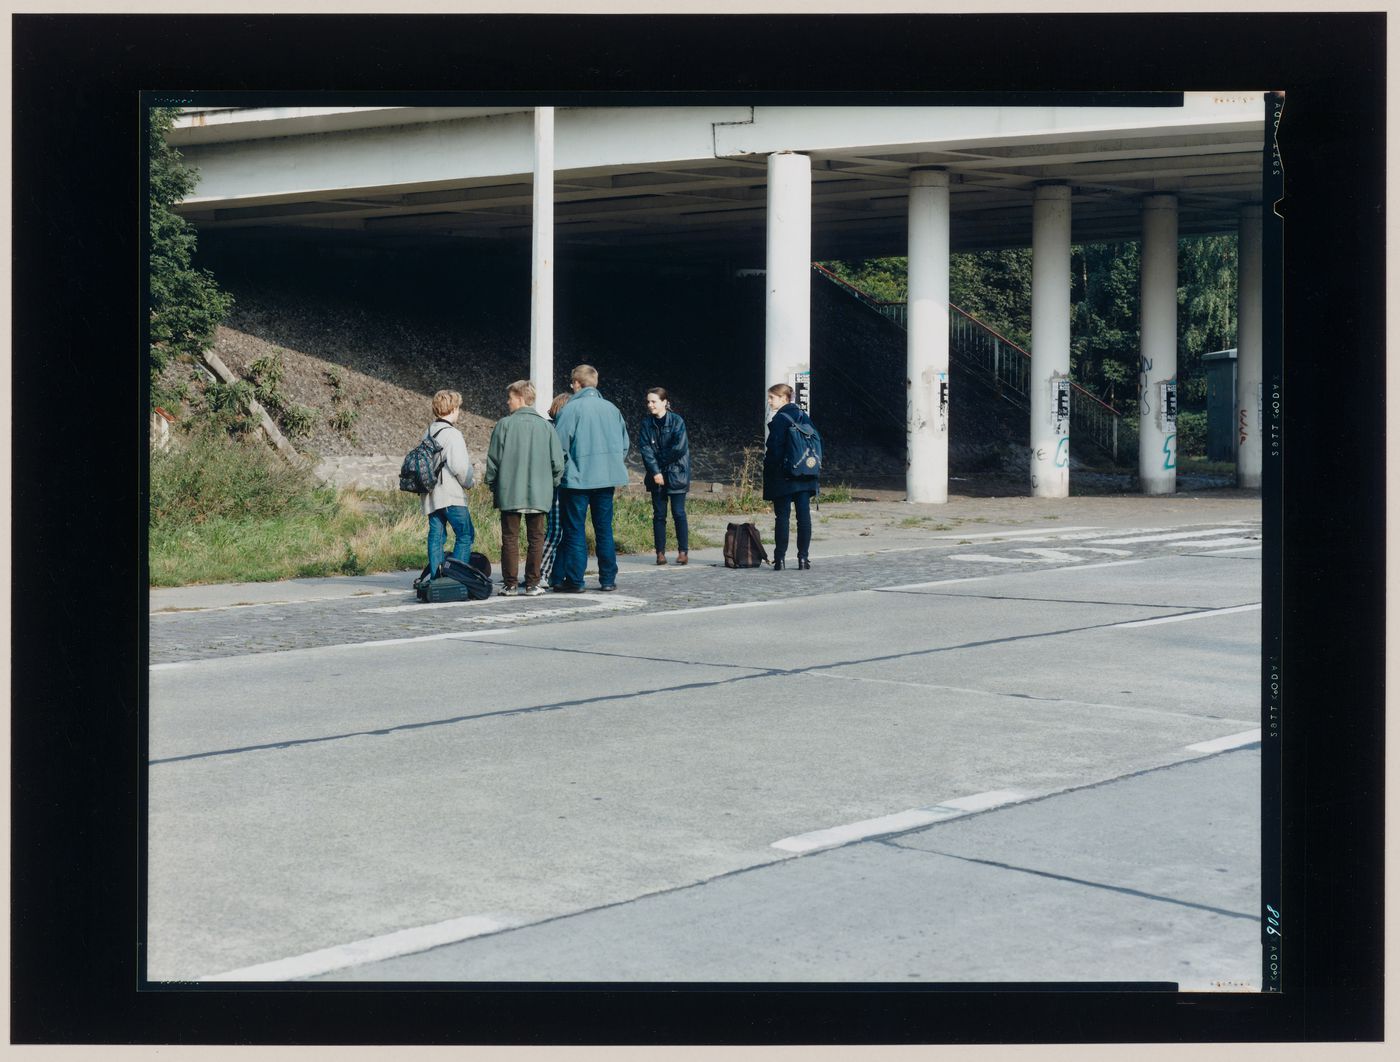 Group portrait of young people standing on the shoulder of a roadway showing the roadside under an overpass and columns, Jülich, Germany (from the series "In between cities")